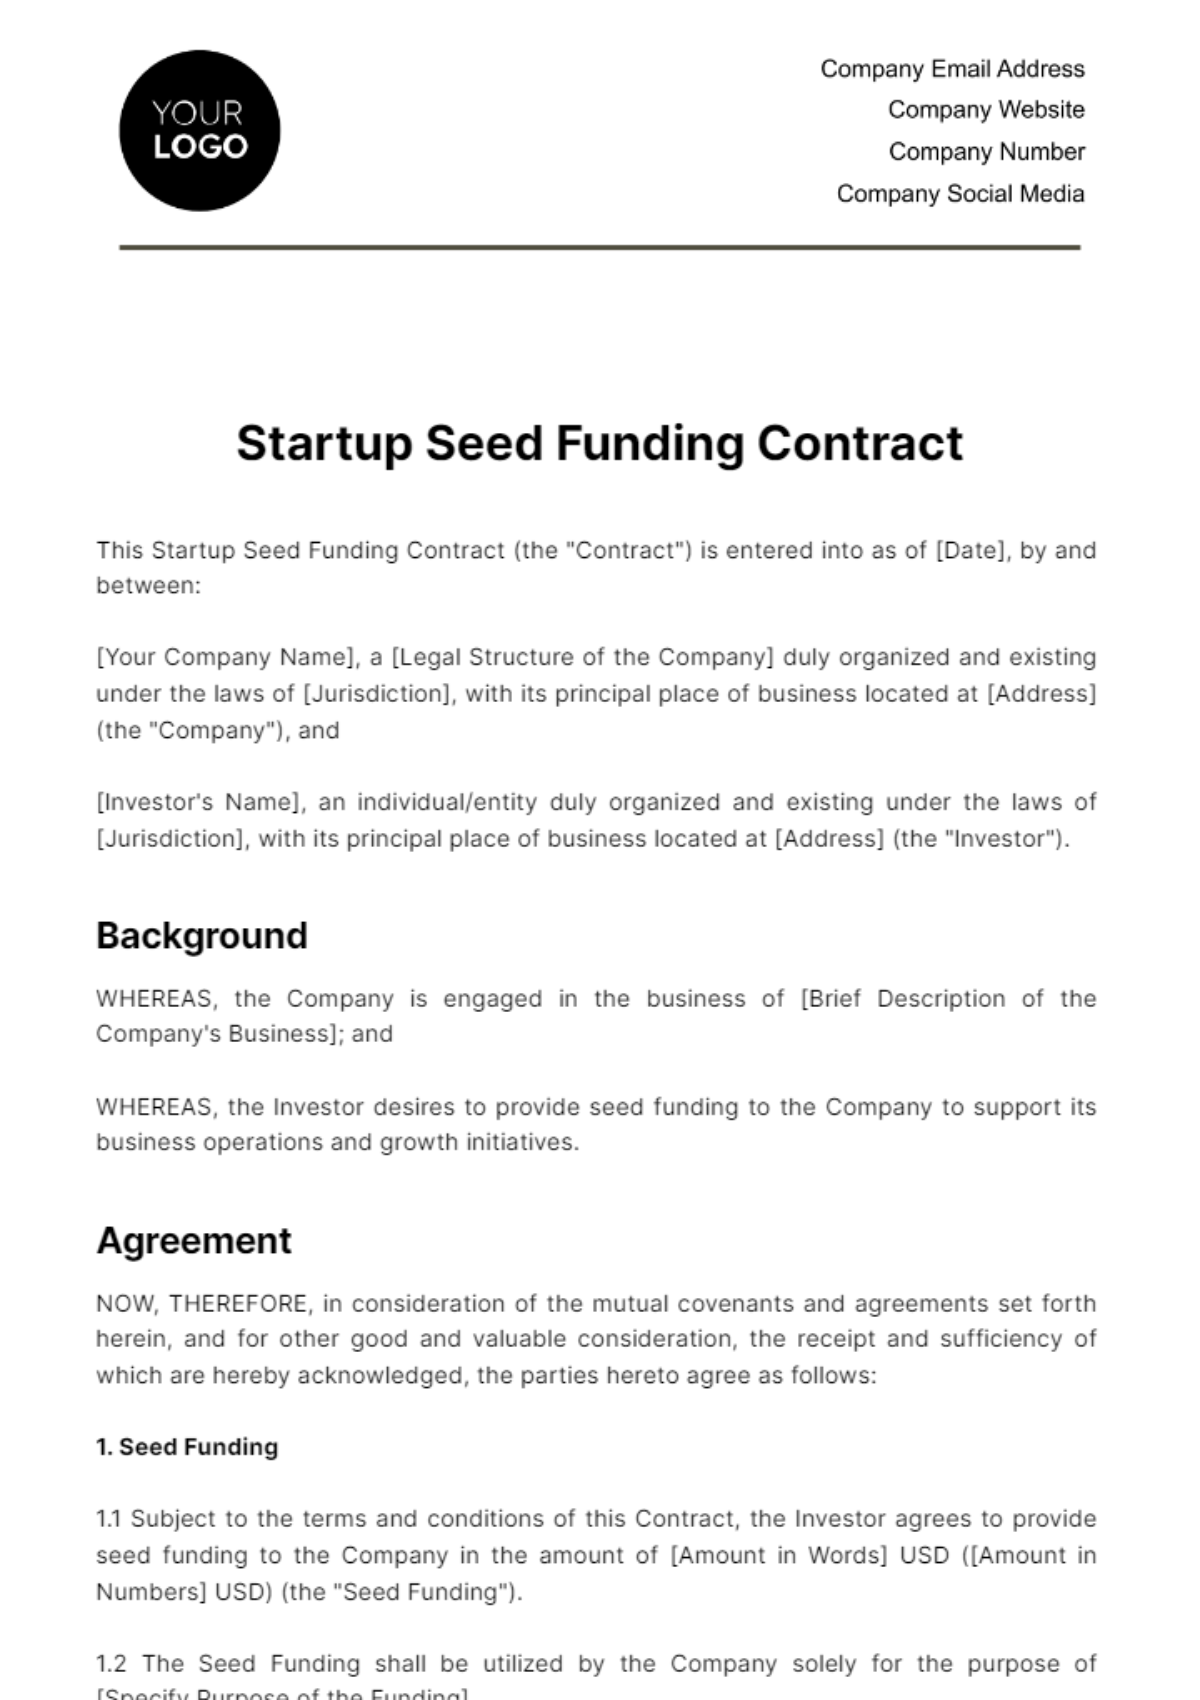 Free Startup Seed Funding Contract Template